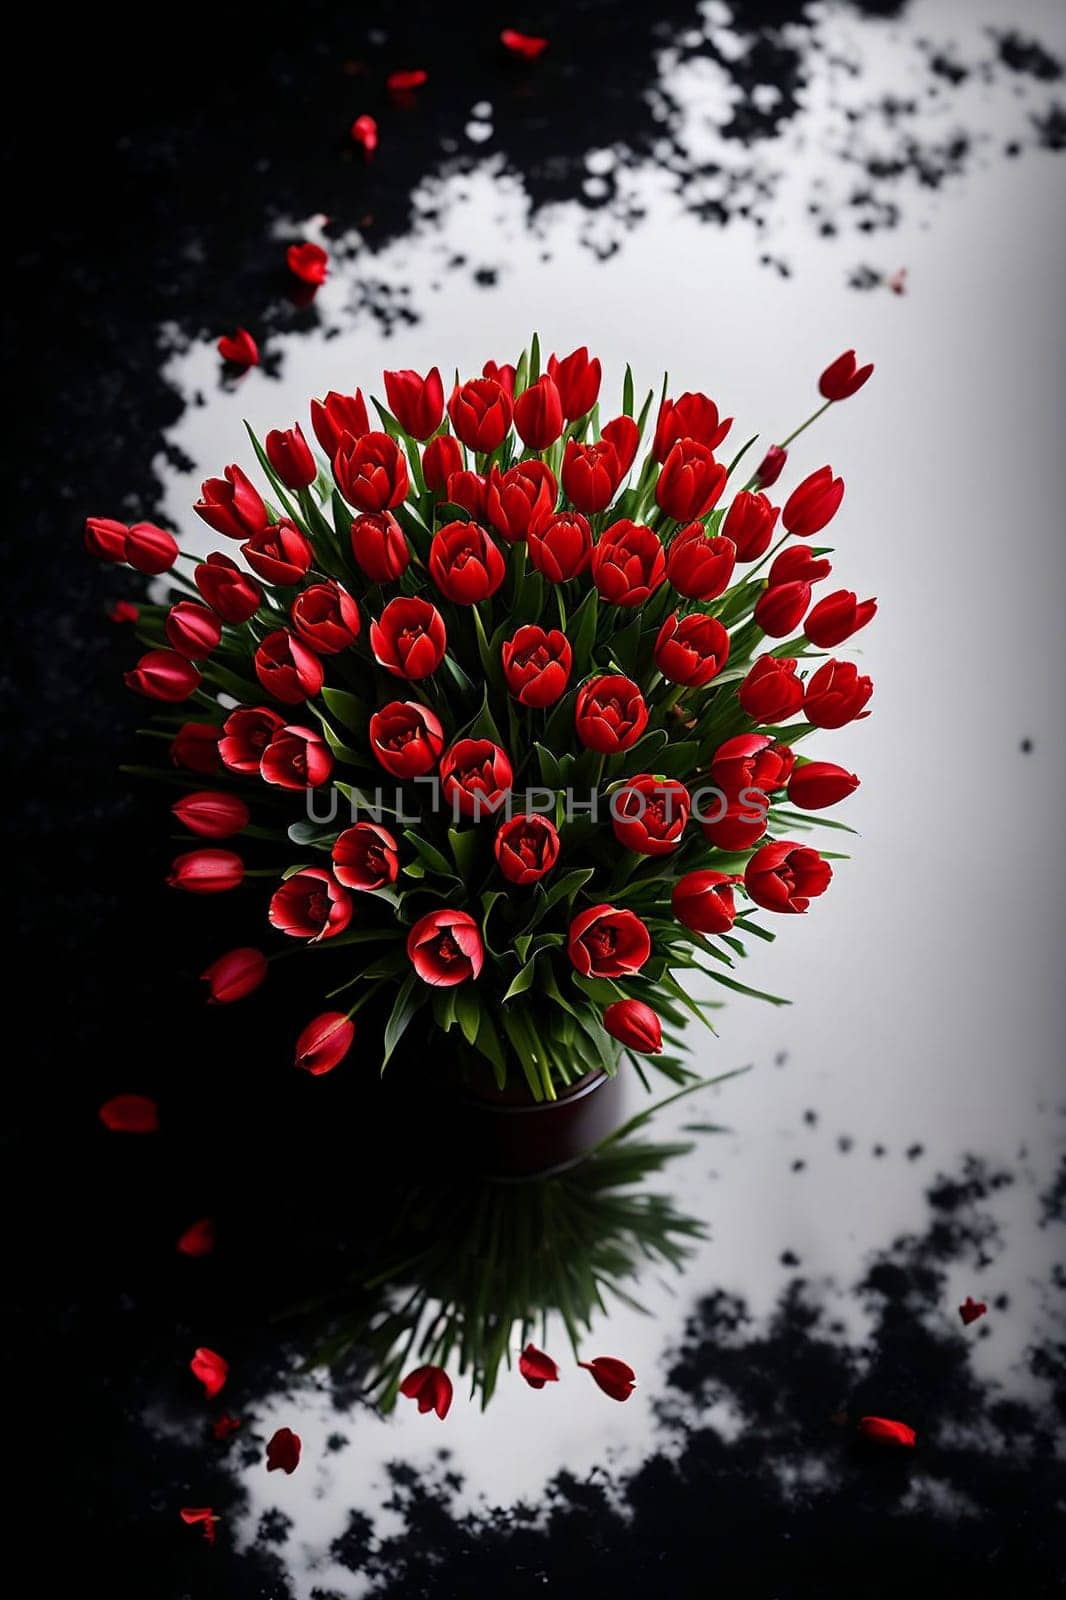 bouquet of red tulips on an abstract black and white background. by Rawlik